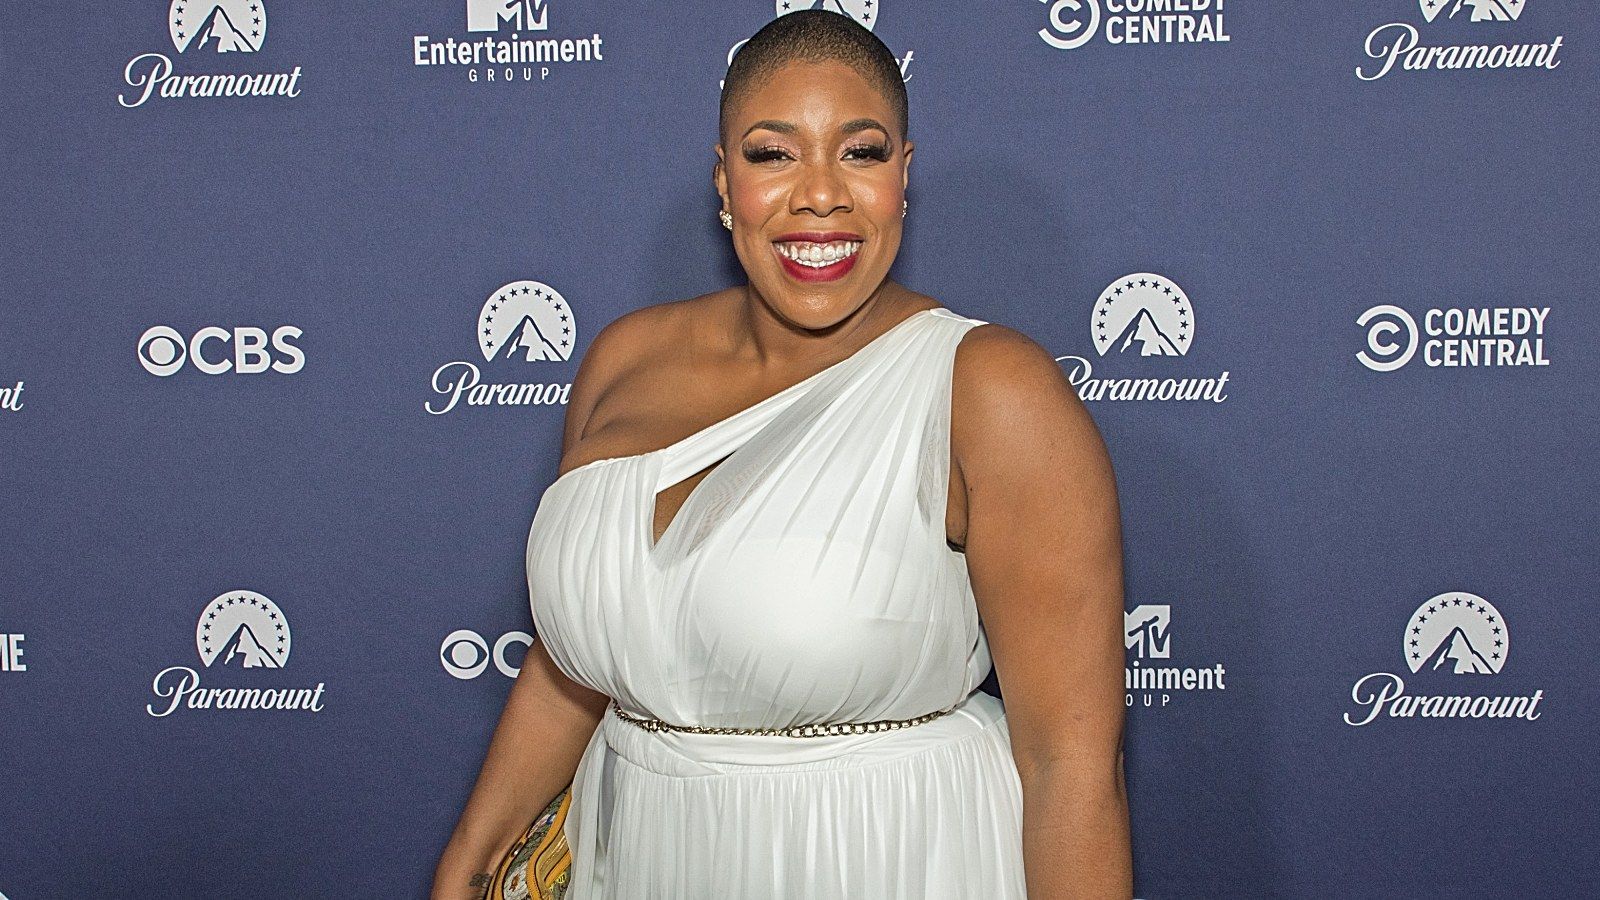 Surprise! MSNBCs Symone Sanders Ties Knot With Shawn Townsend In photo